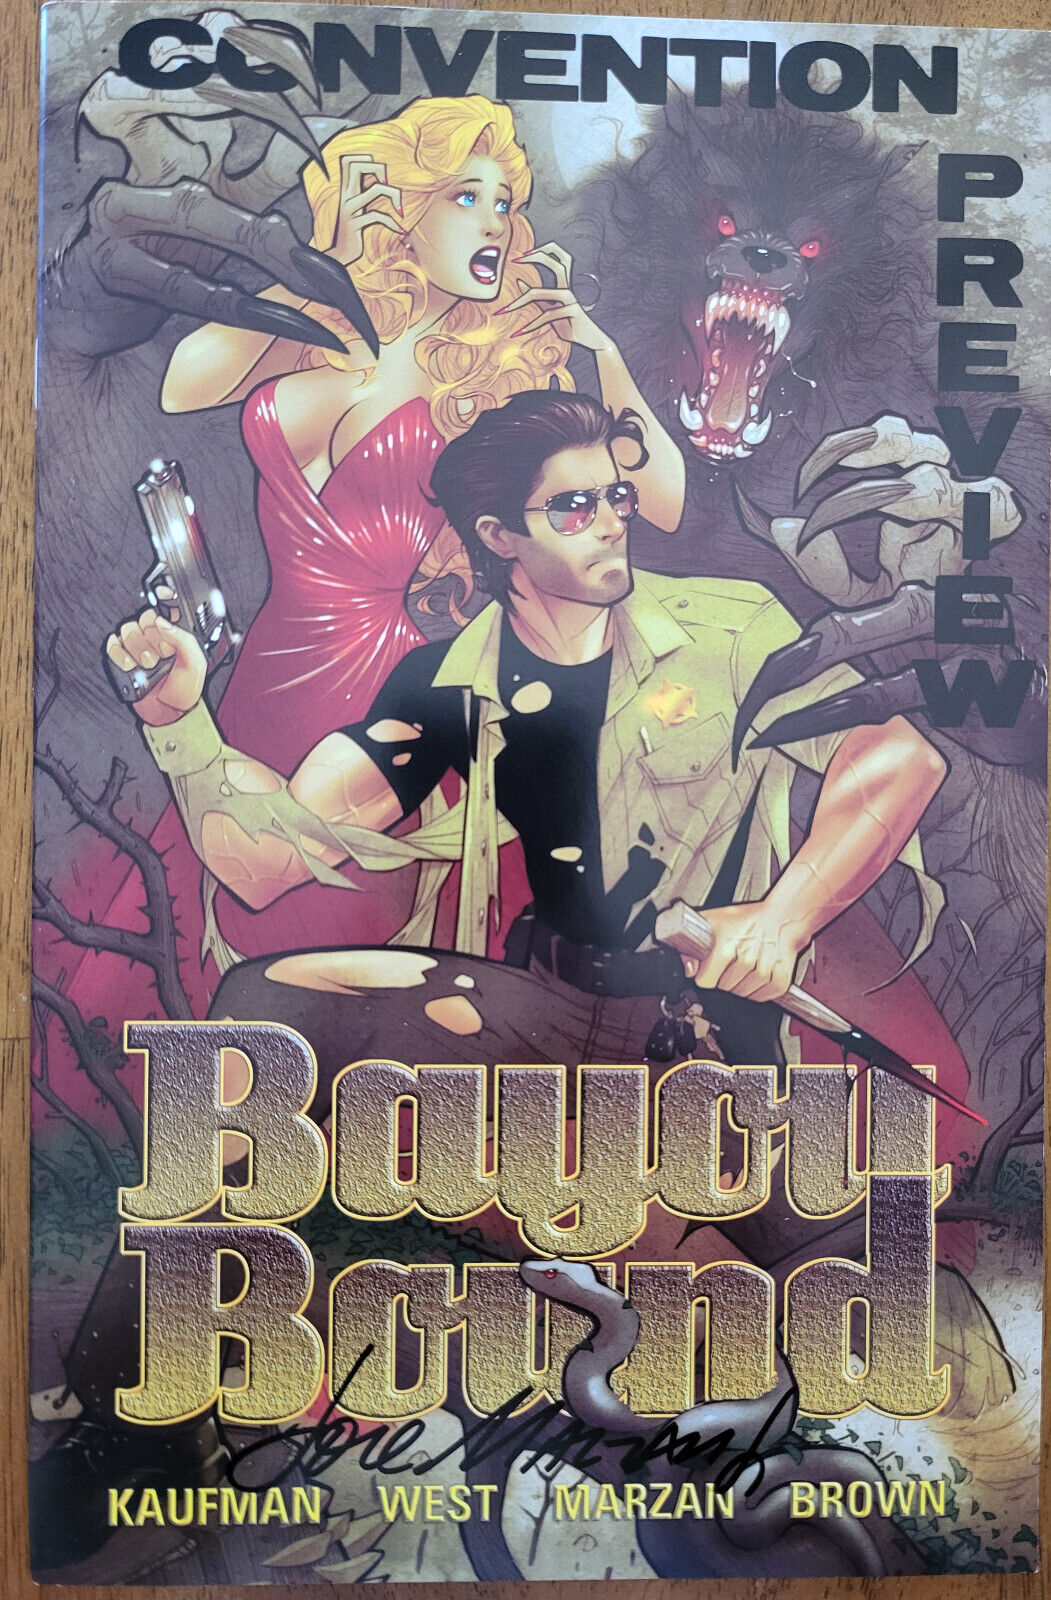 BAYOU BOUND #1 Convention Preview TPB (2015 Big City Creature Comics) -SIGNED-